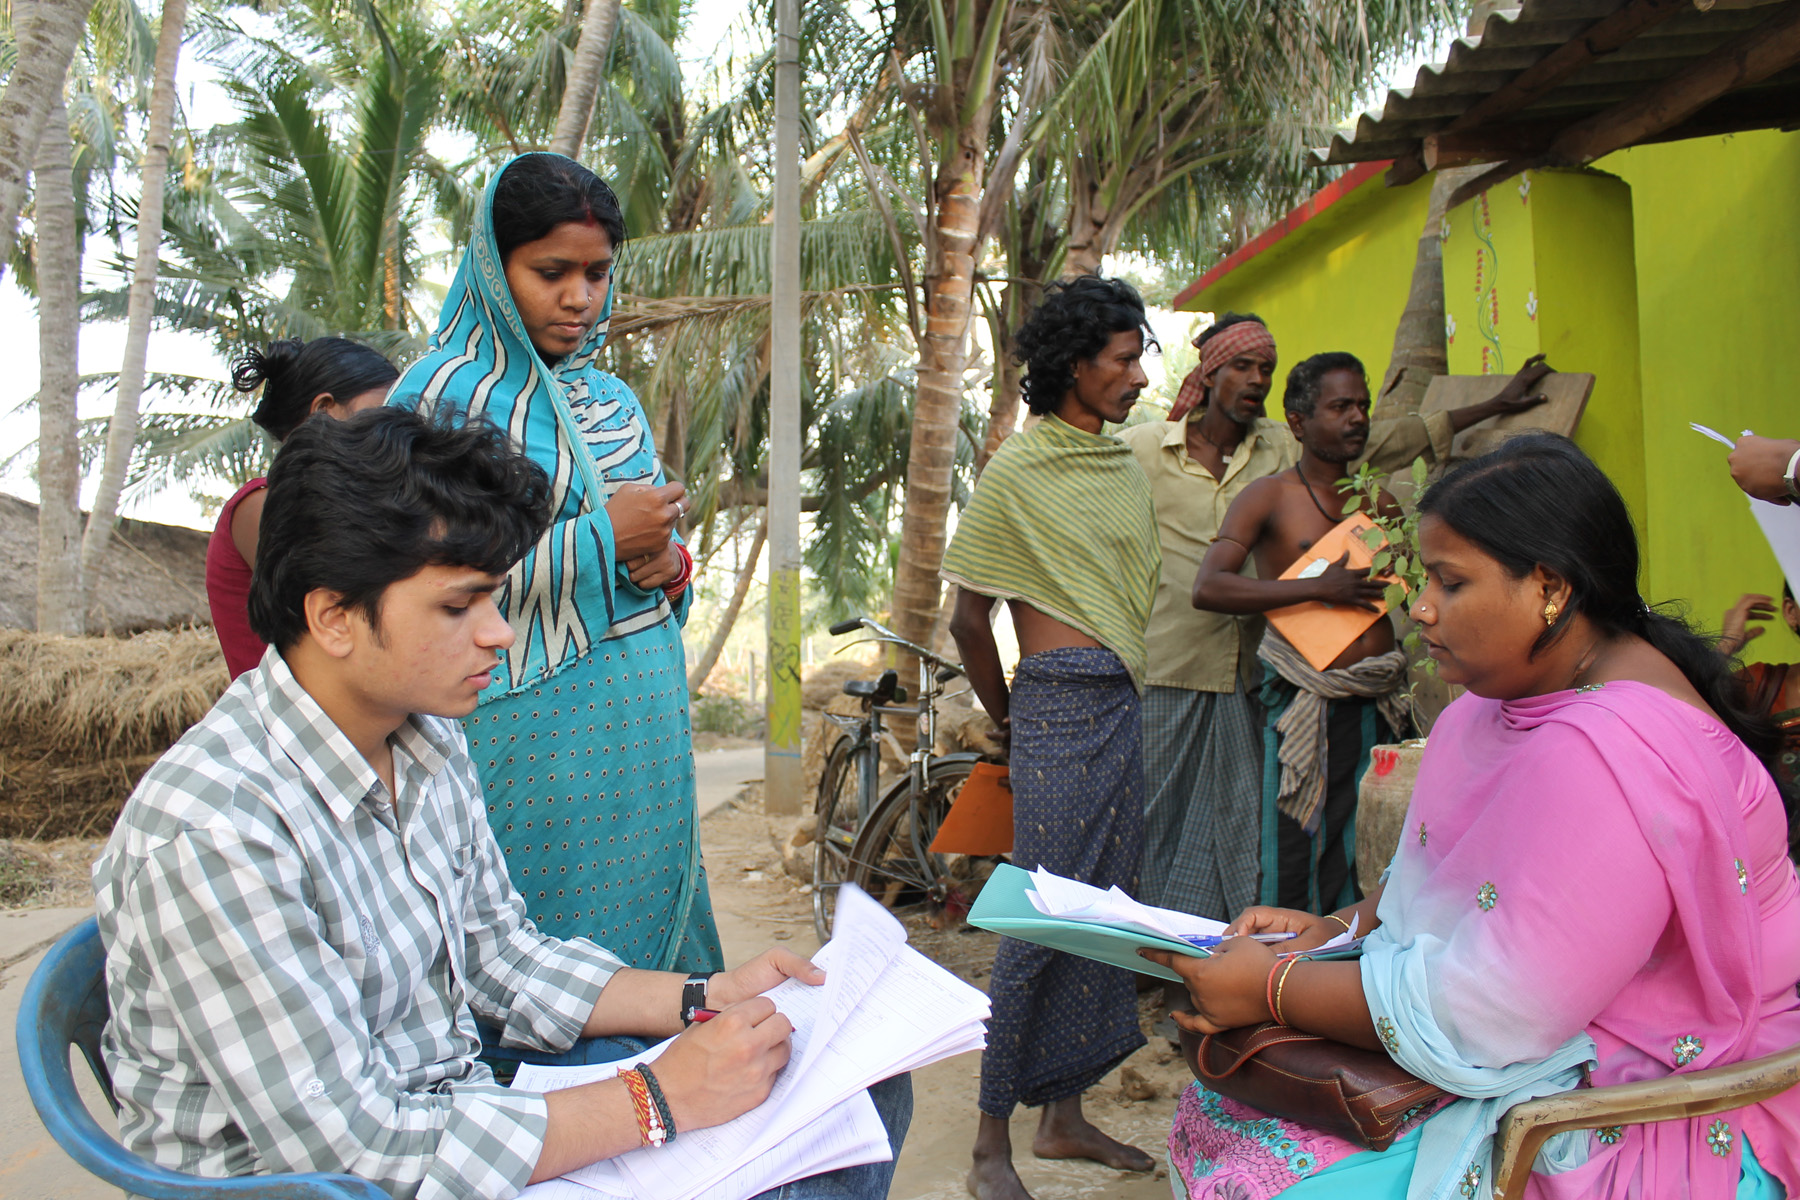 Discussions about the effectiveness of Afat Vimo disaster insurance following Cyclone Phailin in 2013